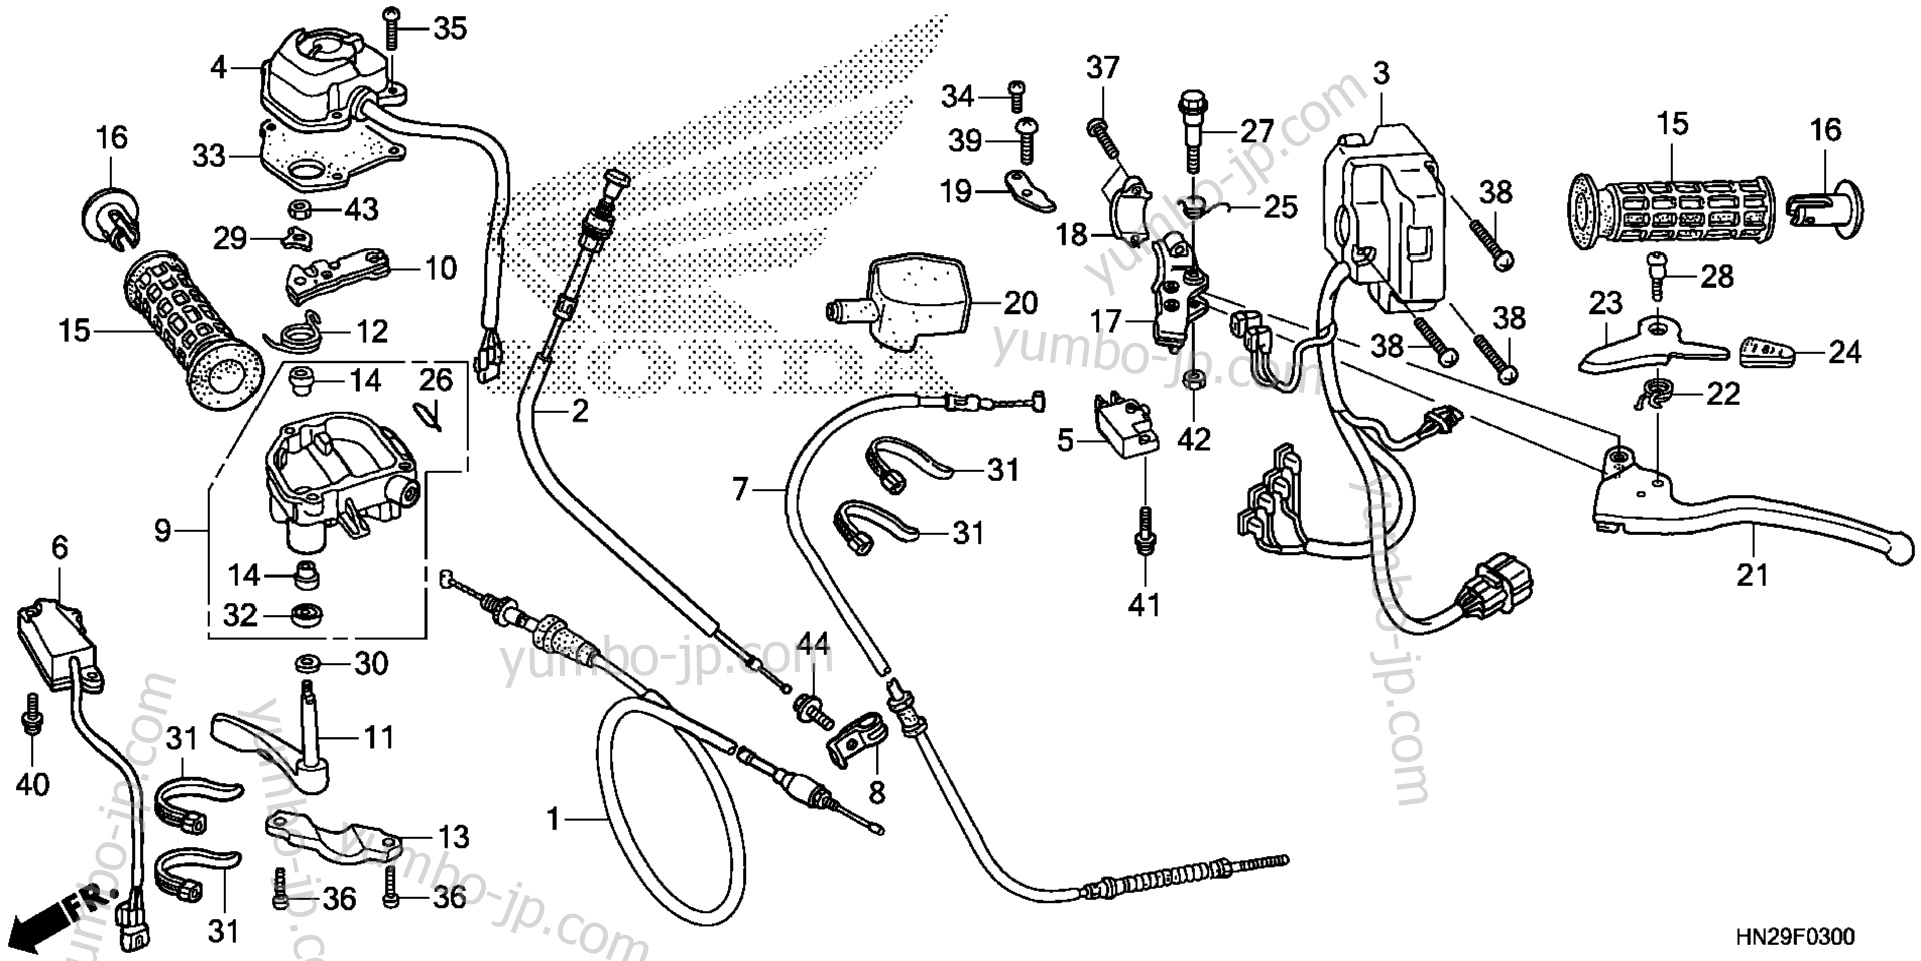 HANDLE LEVER / SWITCH / CABLE for ATVs HONDA TRX500FPA AC 2014 year